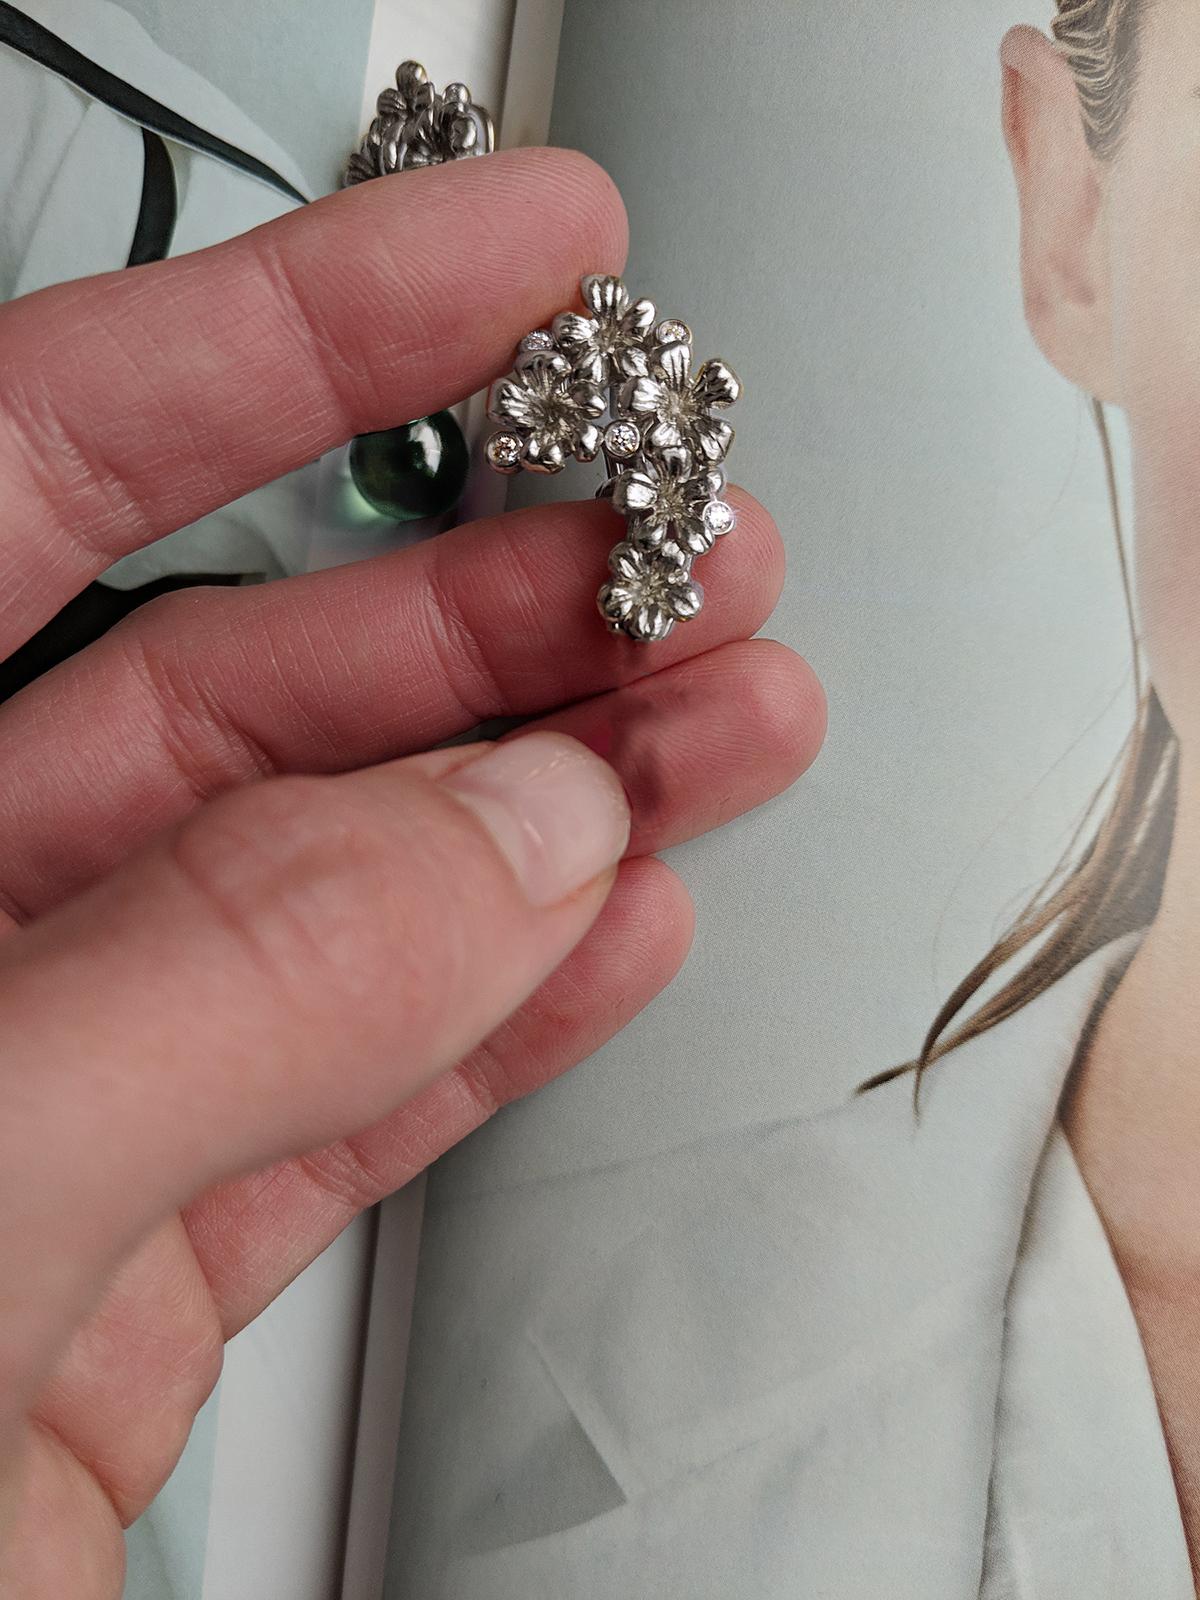 This Plum Blossom pendant in 14 karat white gold is encrusted with 5 round diamonds, and has been featured in both Vogue UA and Harper's Bazaar reviews. We use top natural diamonds VS, F-G, and work with a reputable German gems company that has been